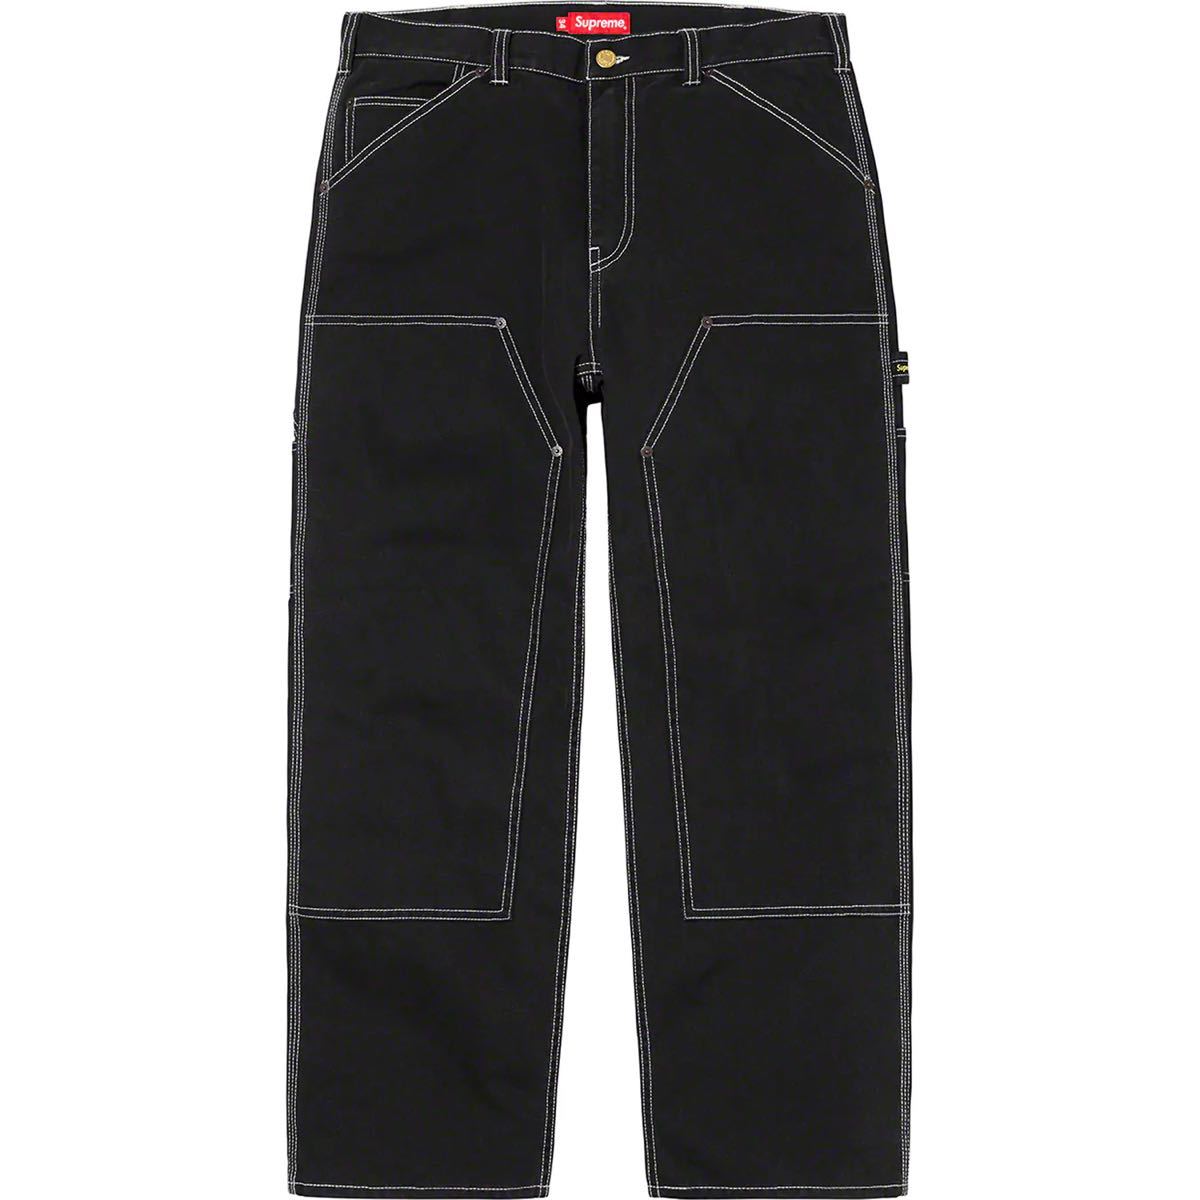 Supreme 】Double Knee Painter Pant 20SS 〜 ダブルニー ペインター